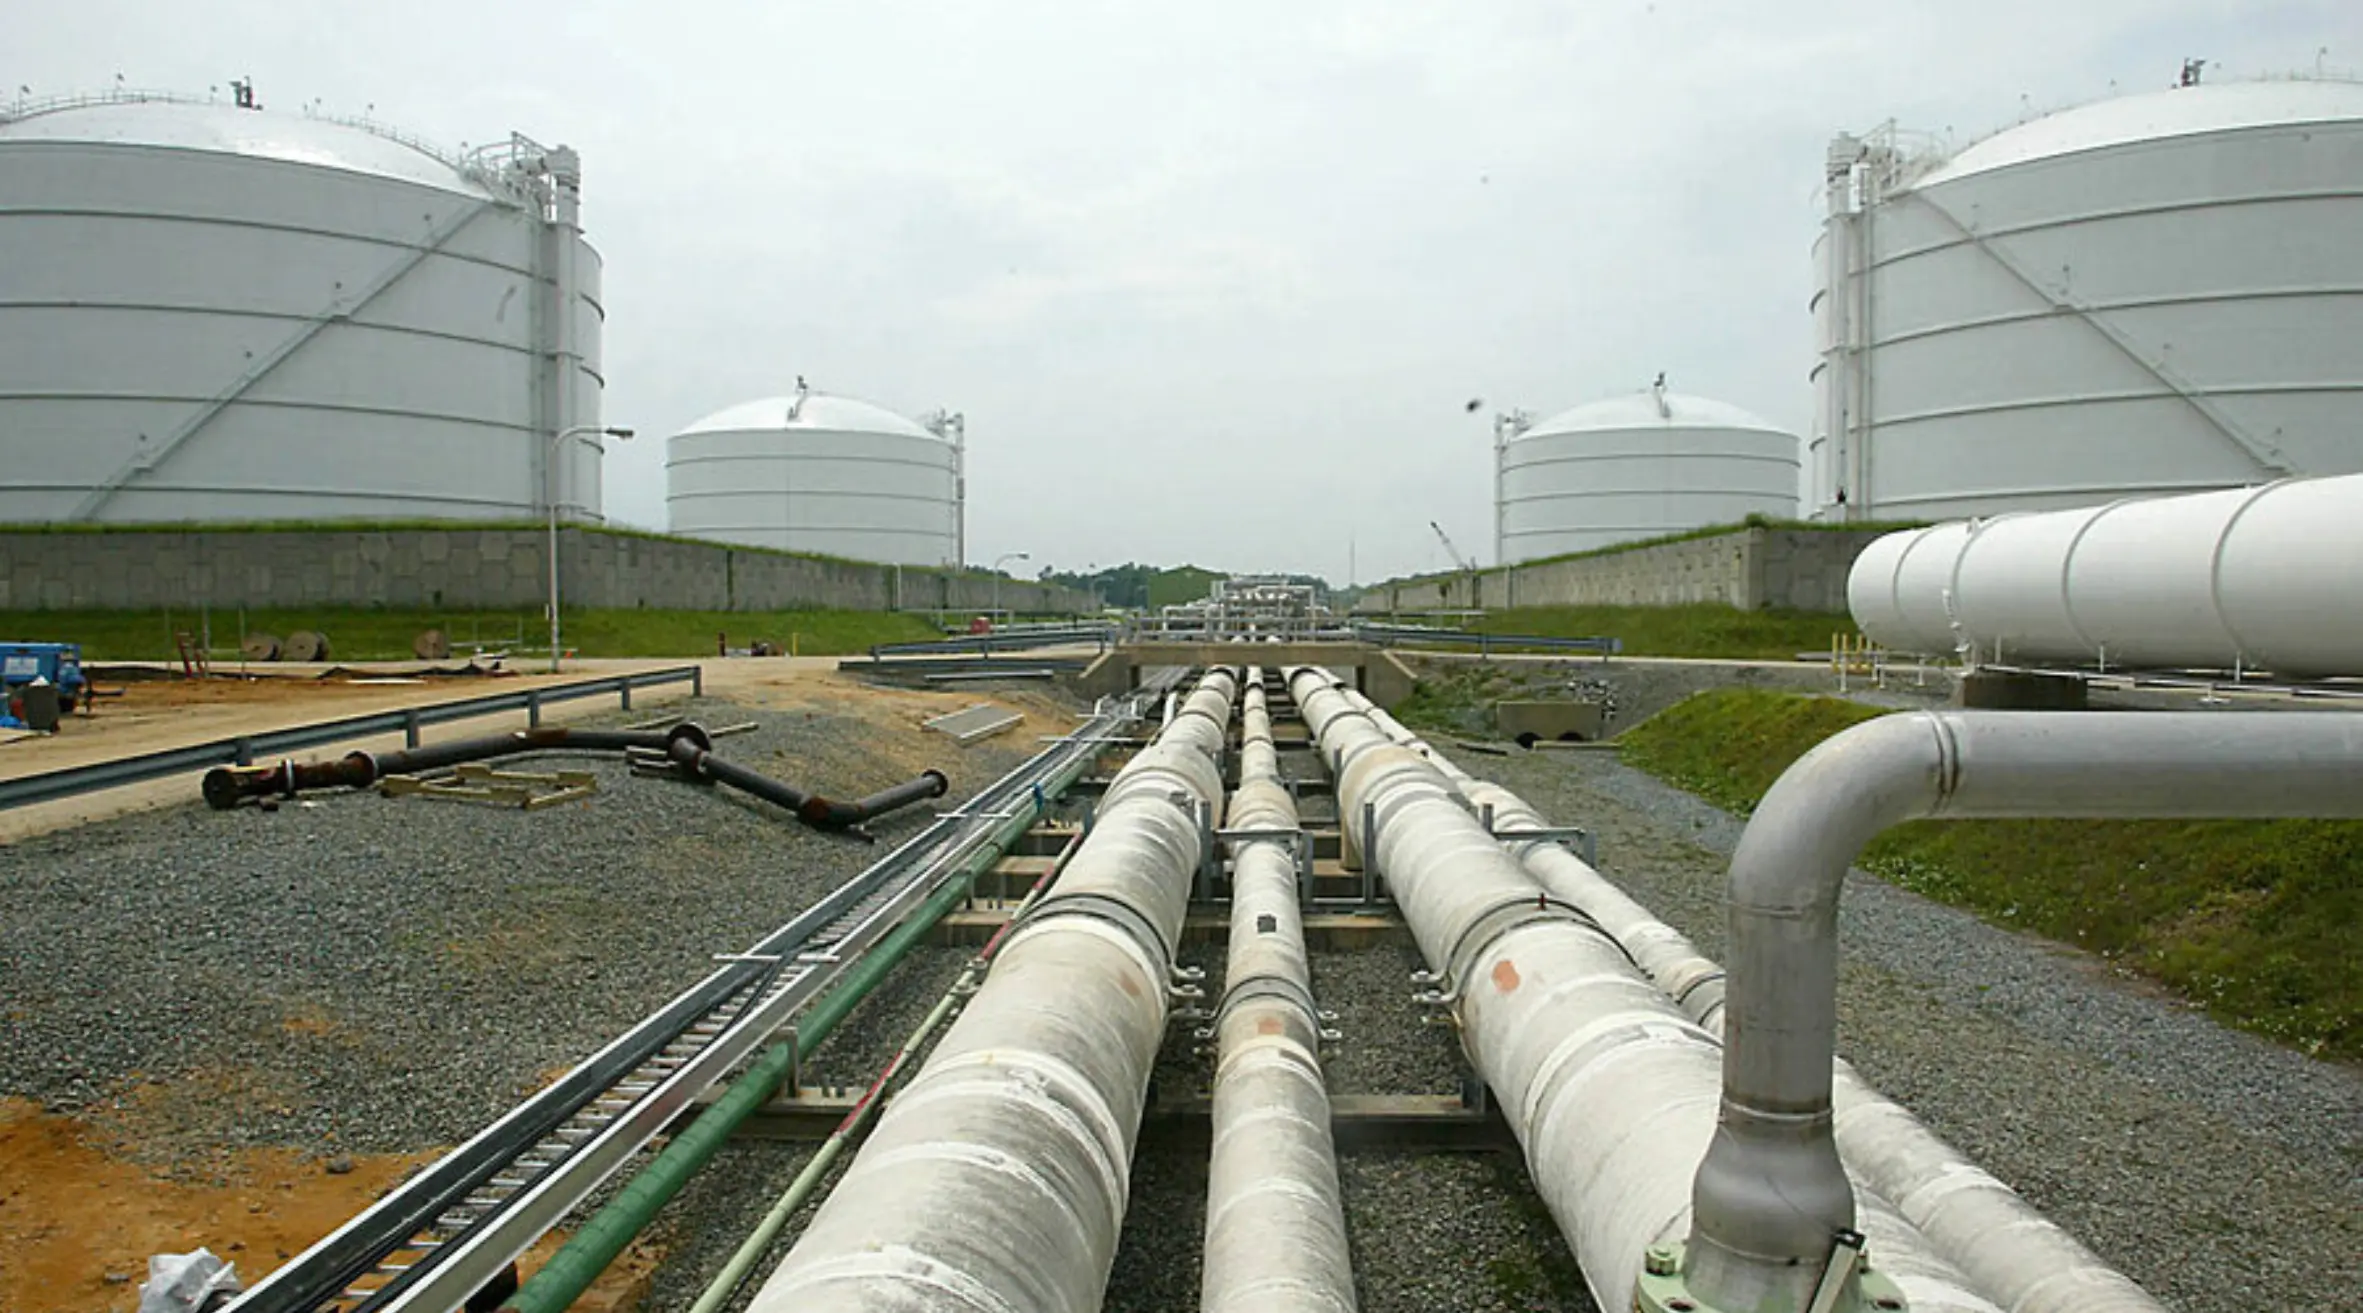 Belgium's increasing reliance on Russian LNG